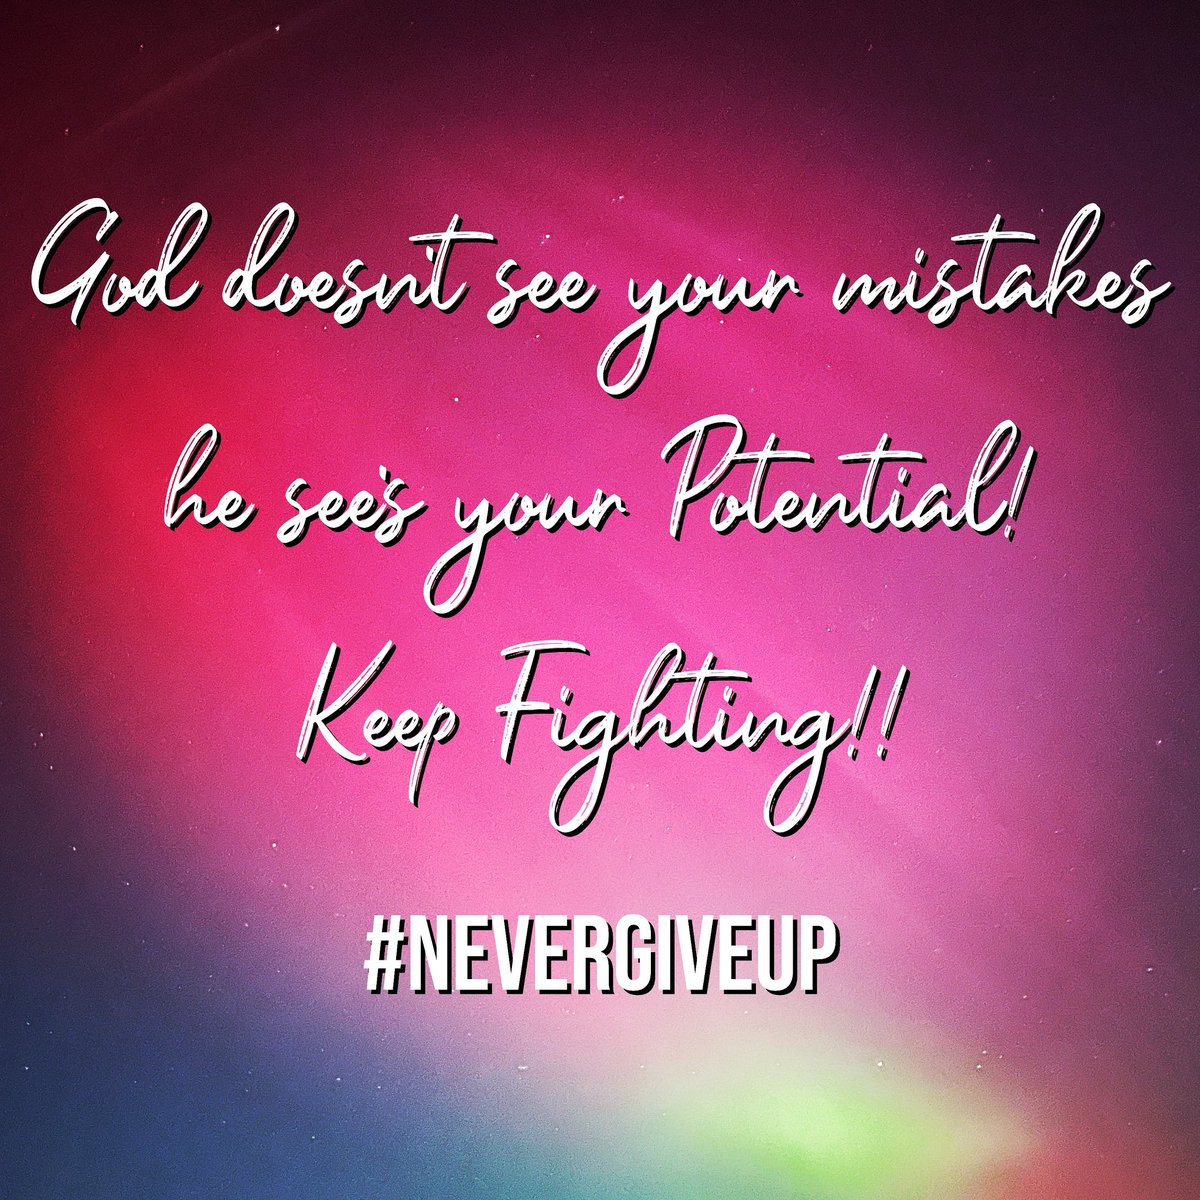 God doesn’t see your mistakes he see’s your Potential! 
Keep Fighting!! #nevergiveup #nevergivein #dontgiveup #keepfighting #trustgod #walkbyfaithnotbysight